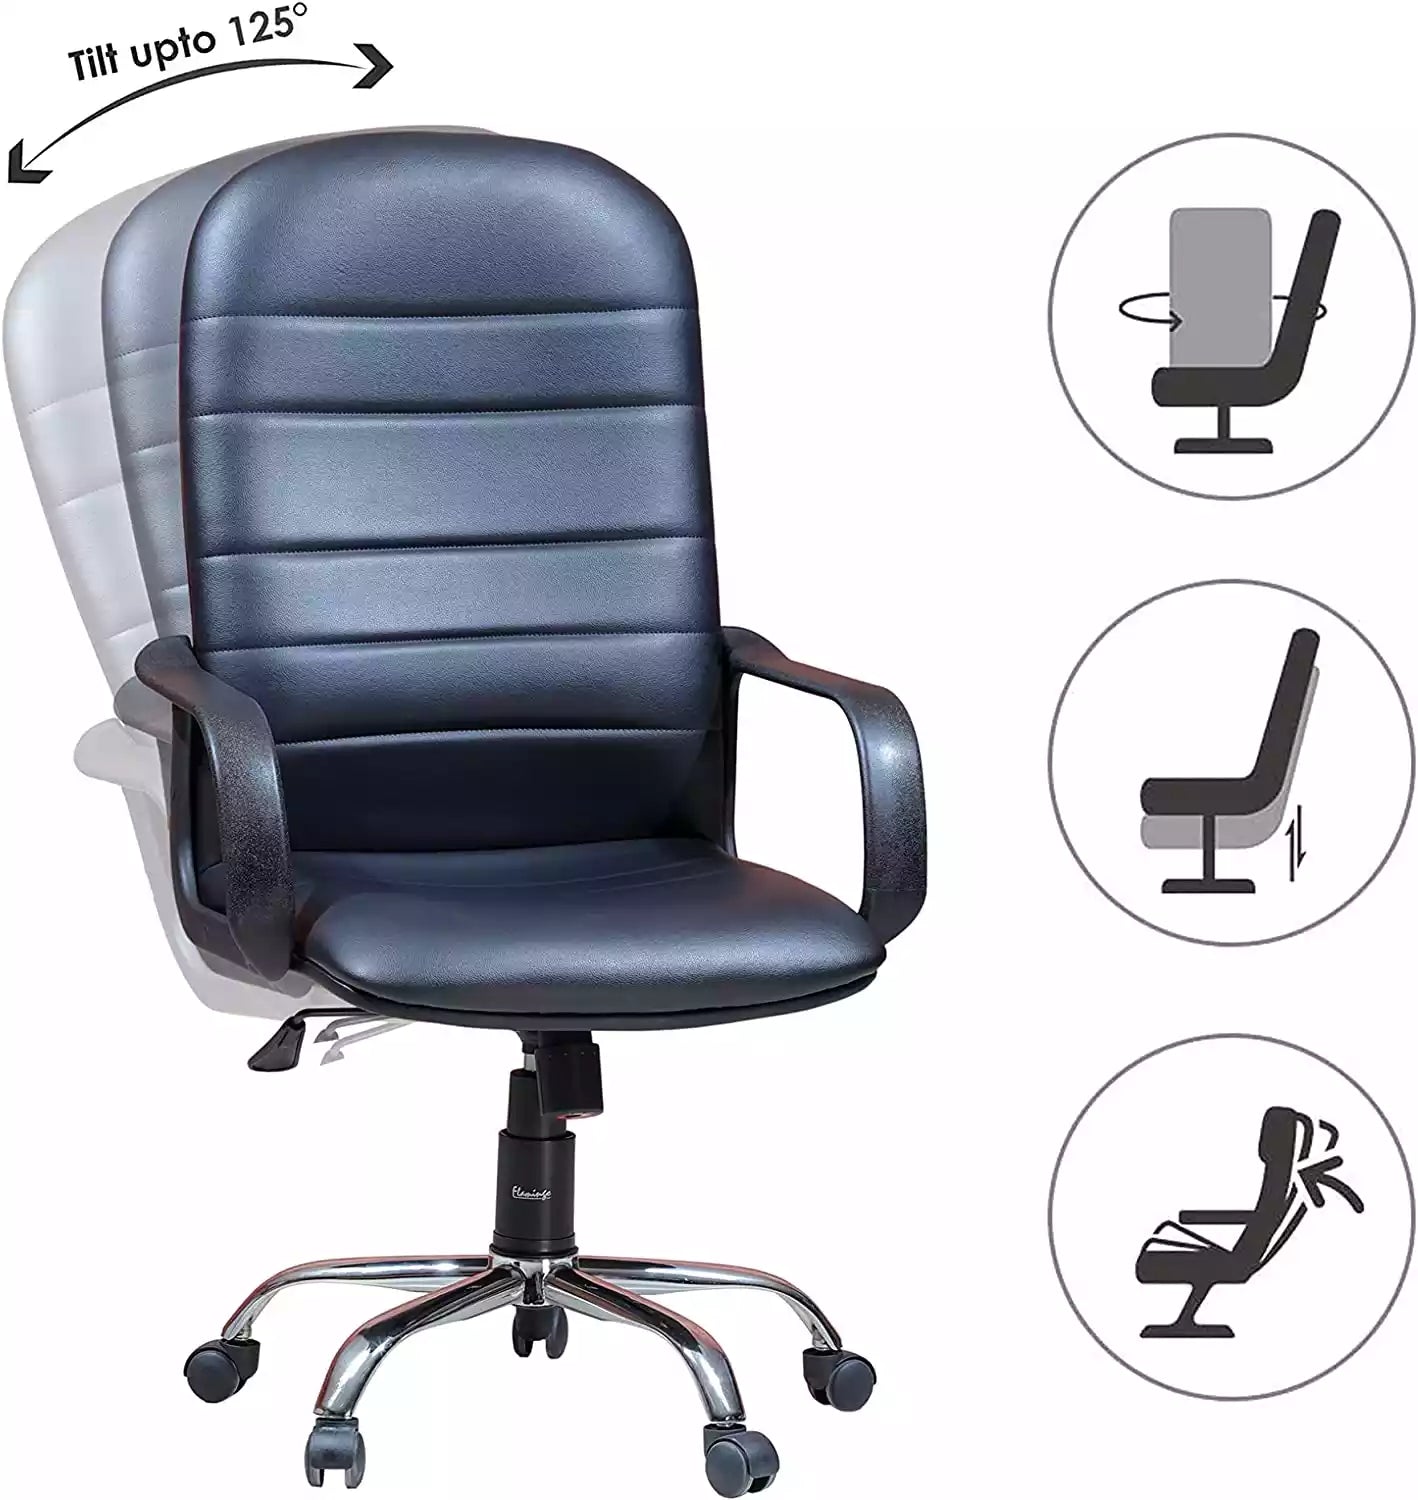 Office Chair with Adjustable Height and Lumbar Support, Black Color